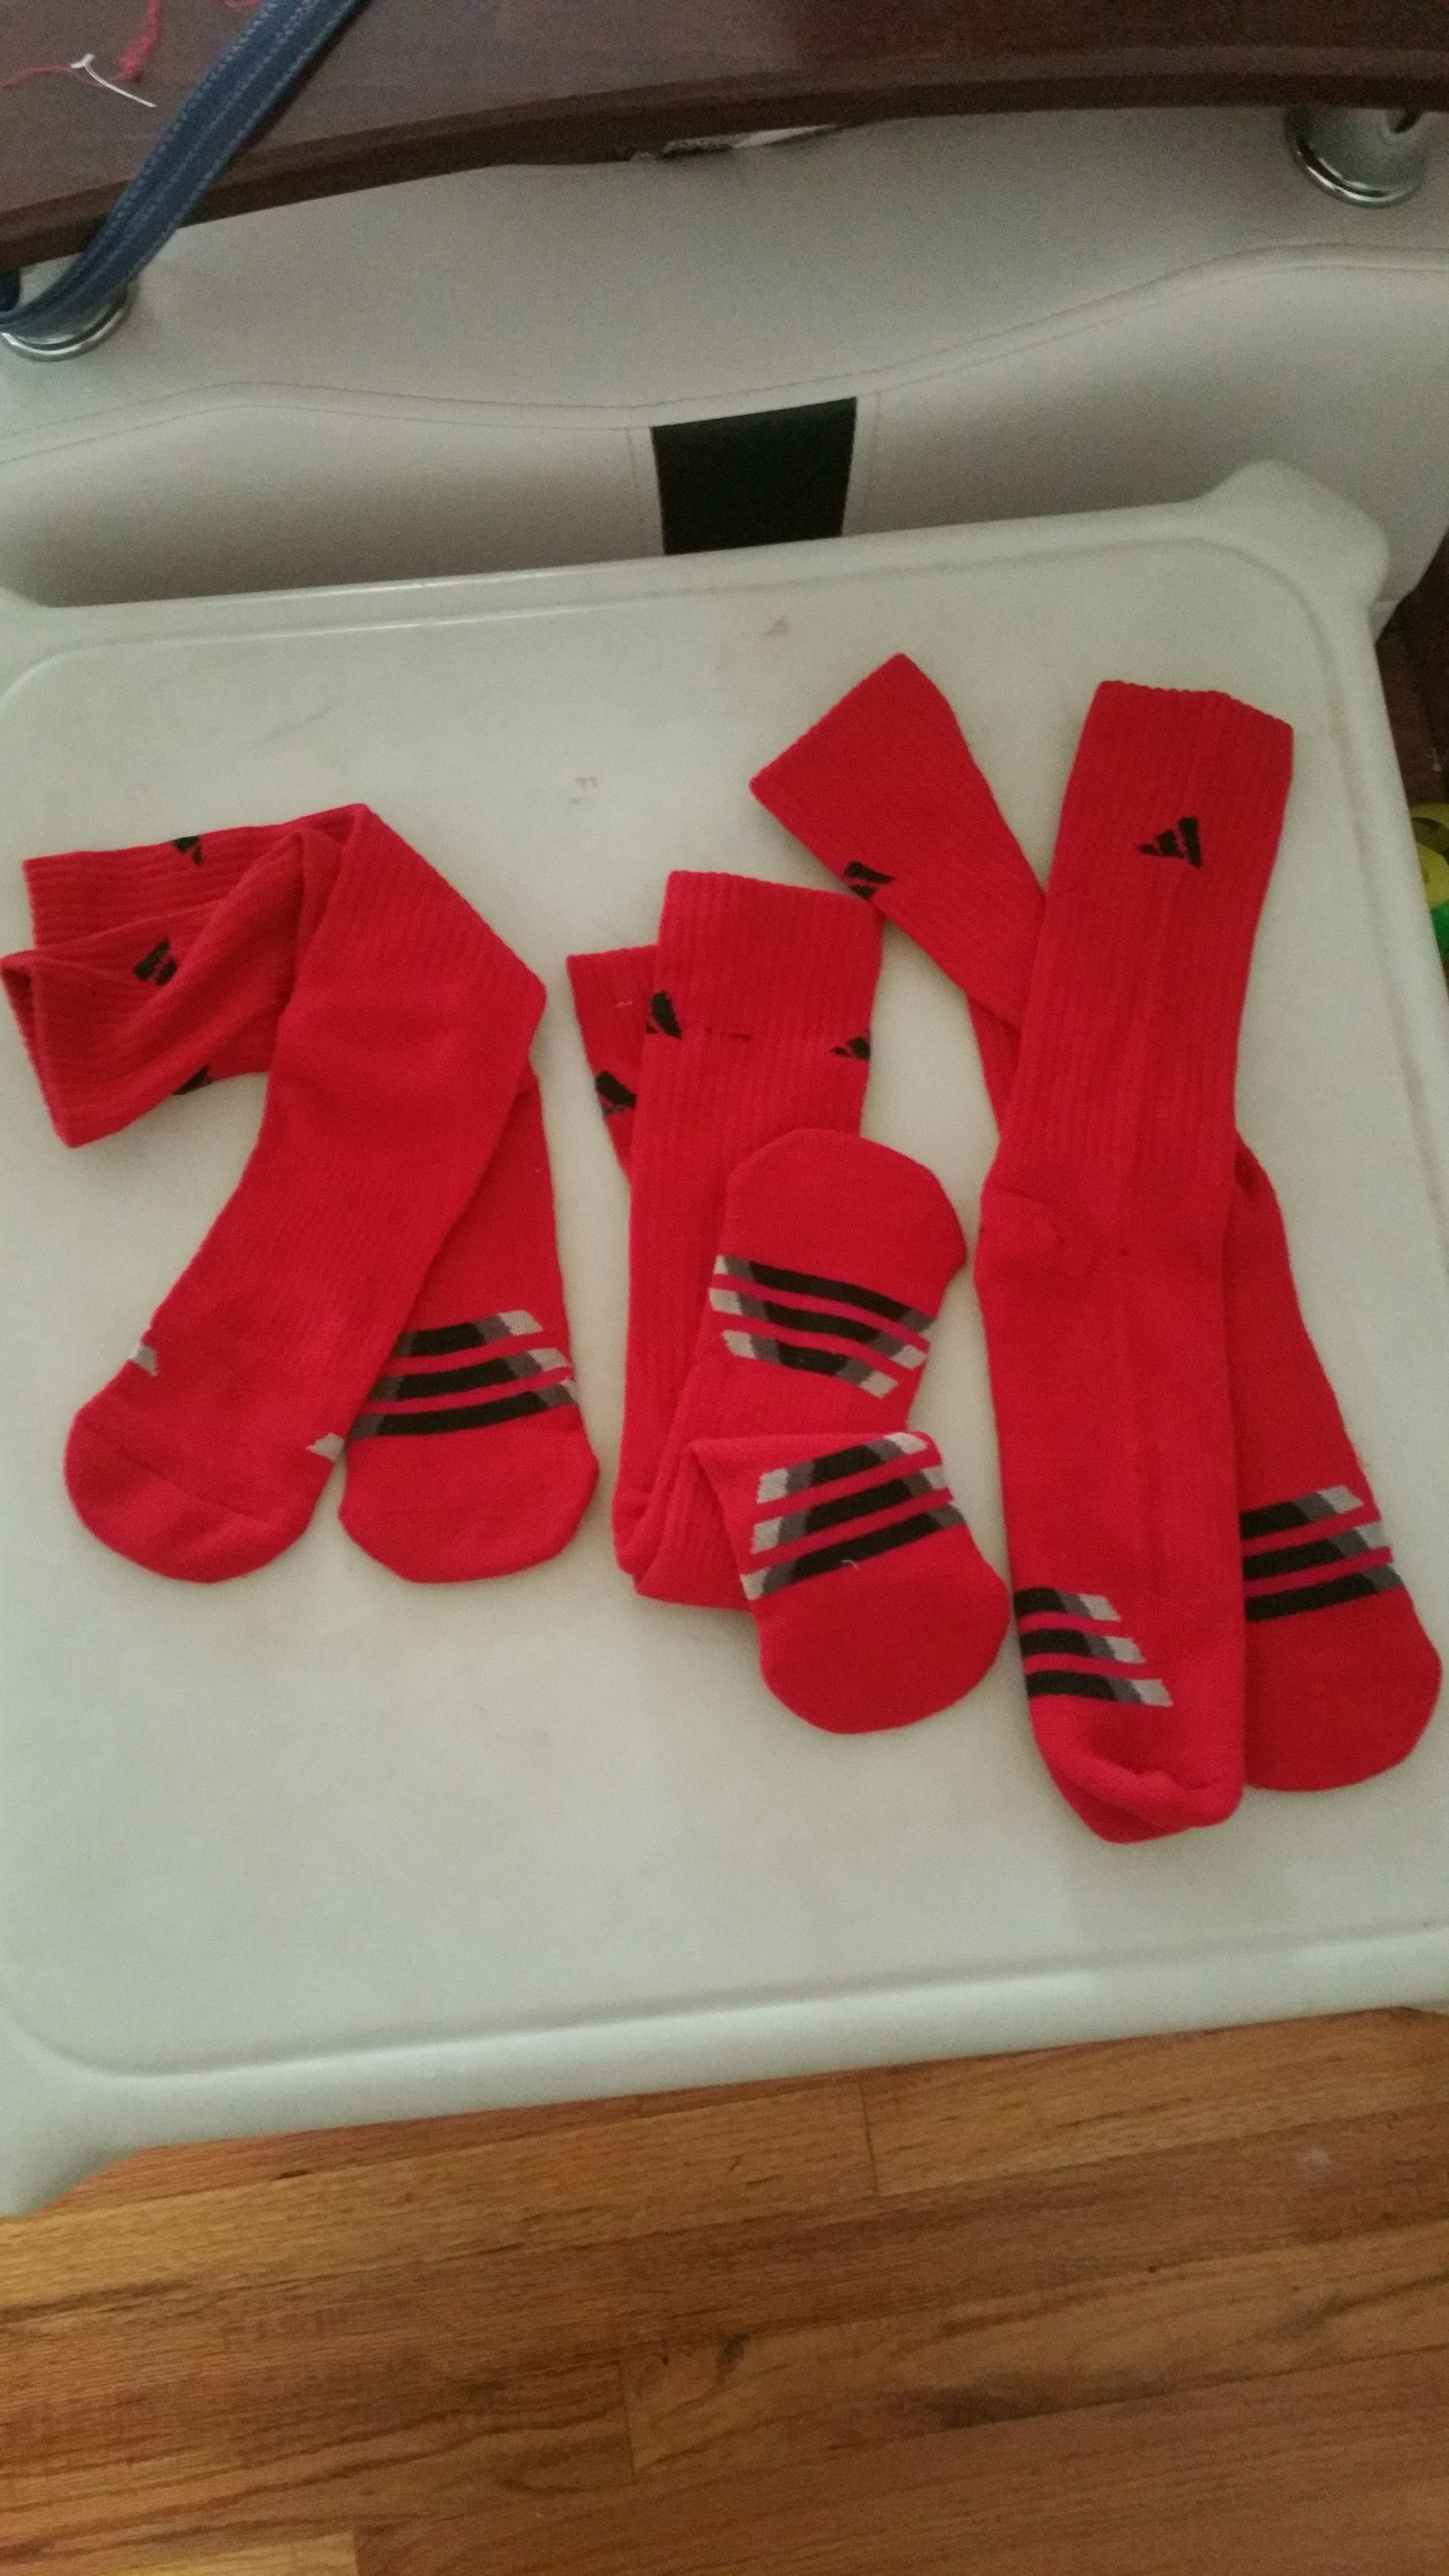 3 pairs Adidas socks S-L new with tag